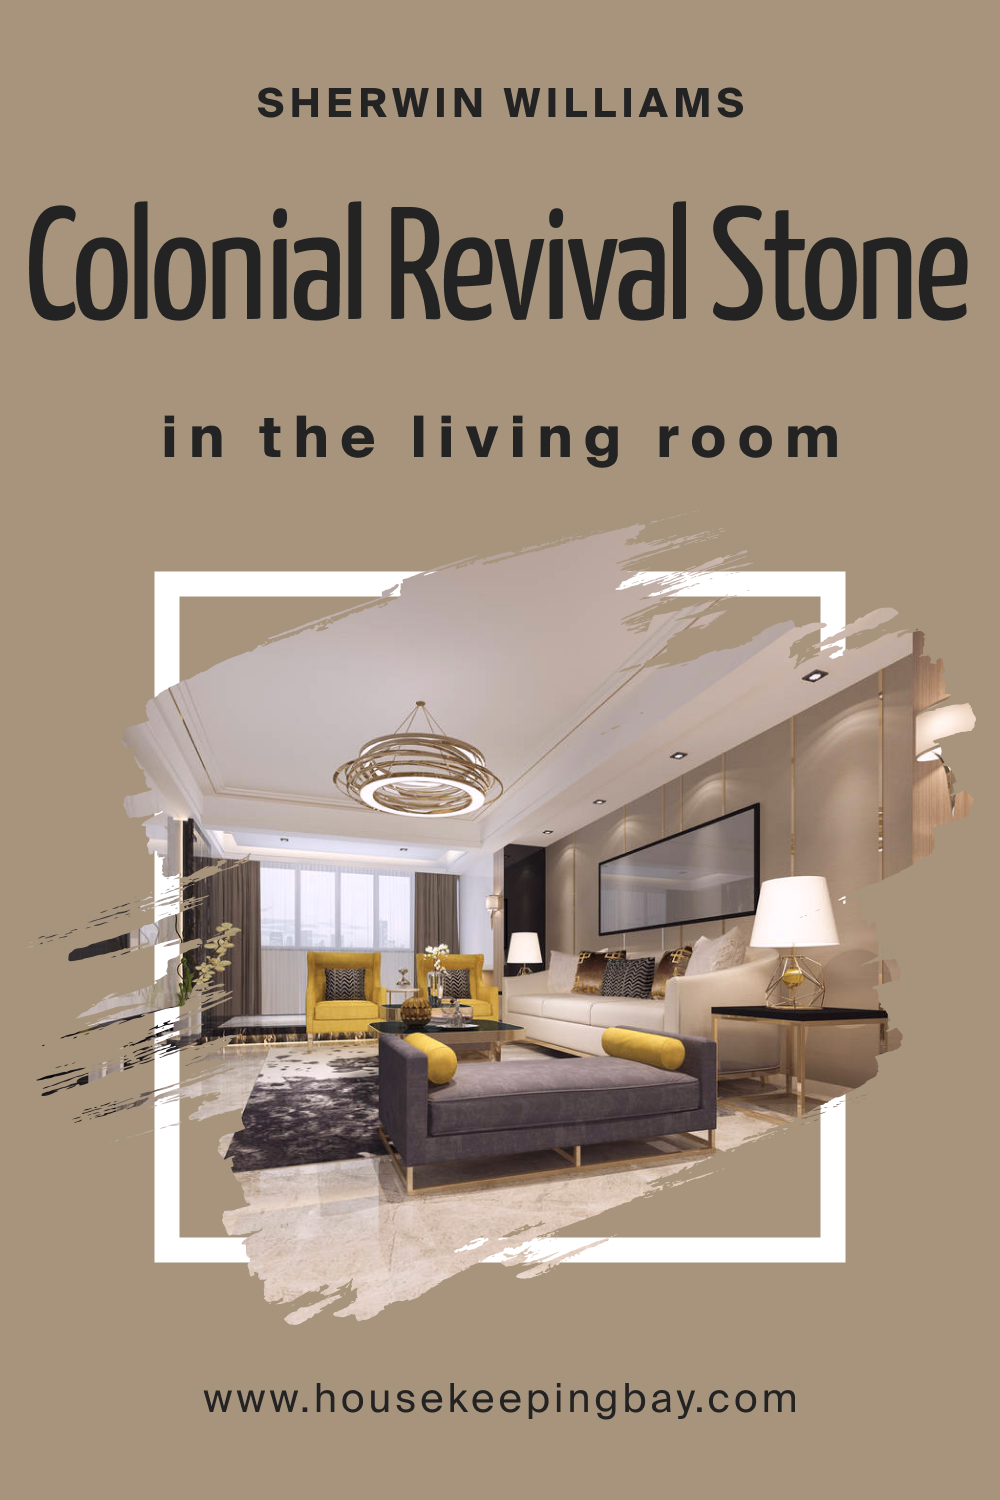 Sherwin Williams. SW 2827 Colonial Revival Stone In the Living Room